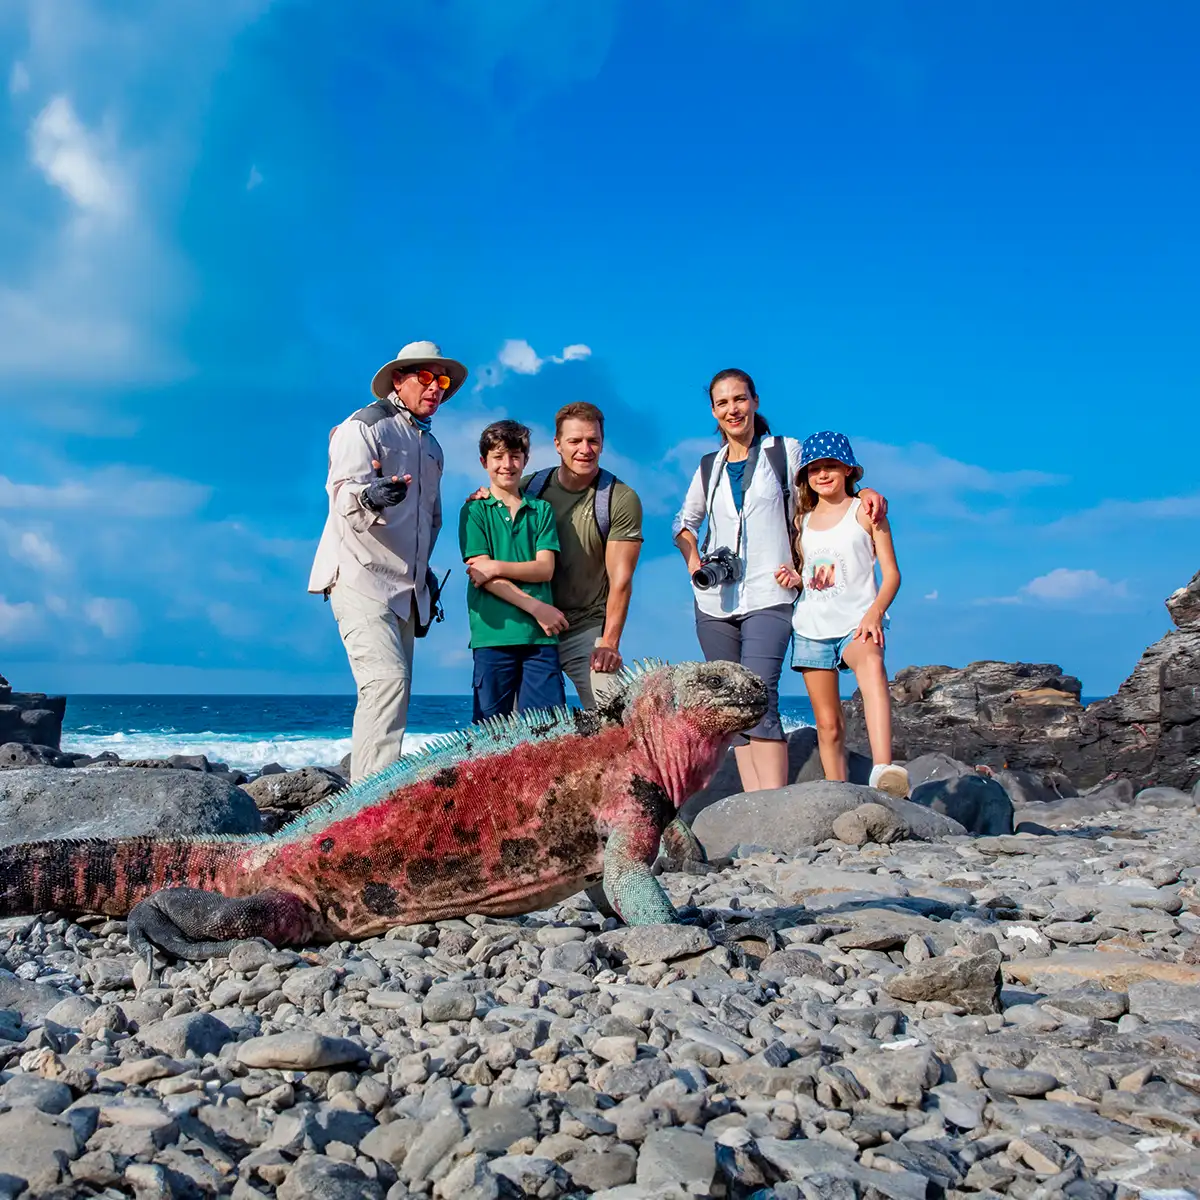 Family And Guide Watching A Marine Iguana In Galapagos